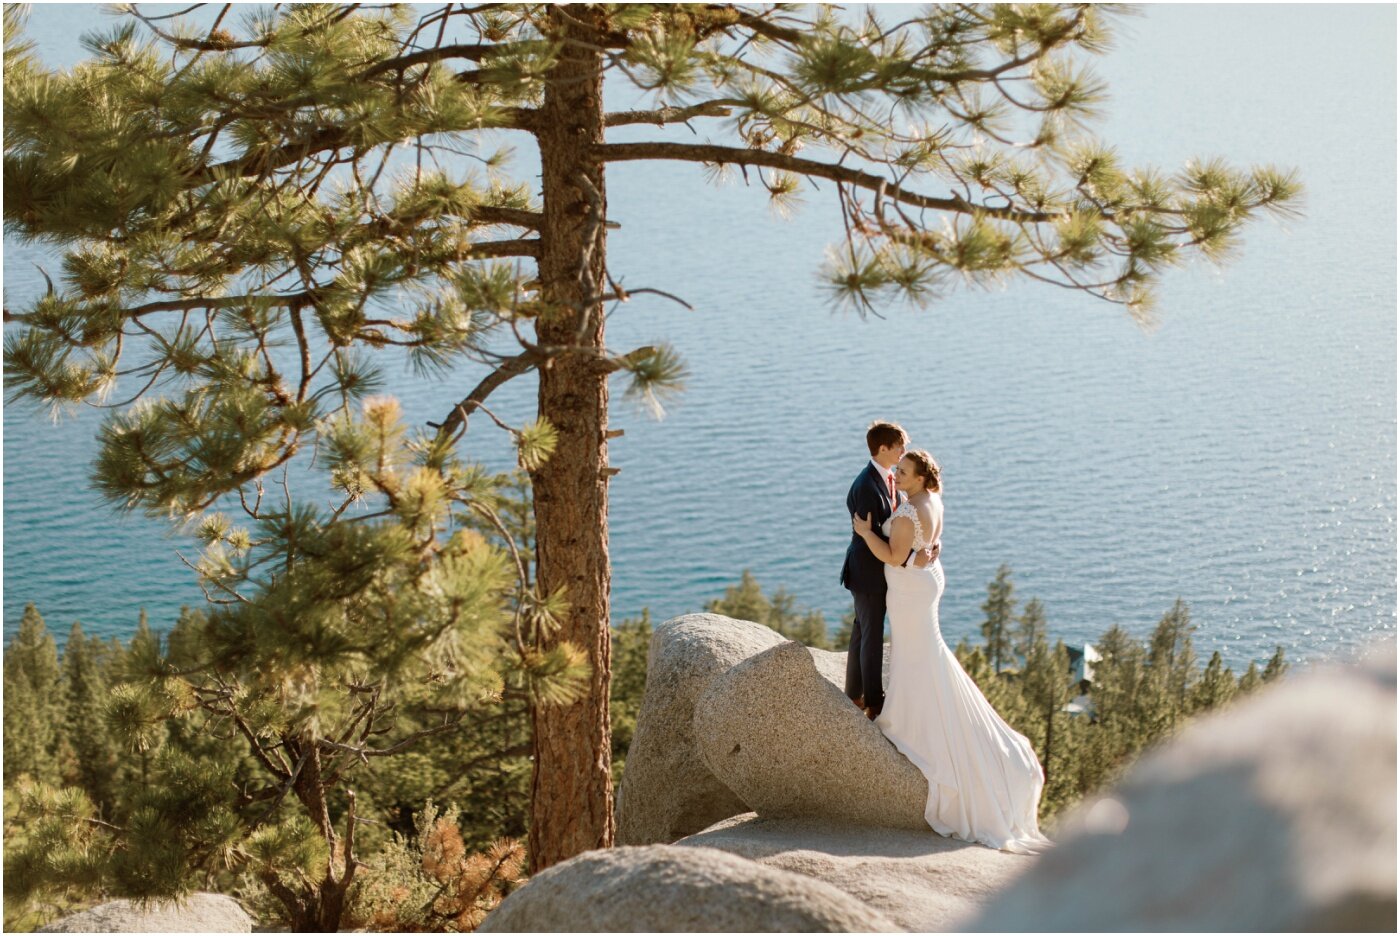 ruthanne z - lake tahoe elopement photographer - how to elope in lake tahoe_0002.jpg